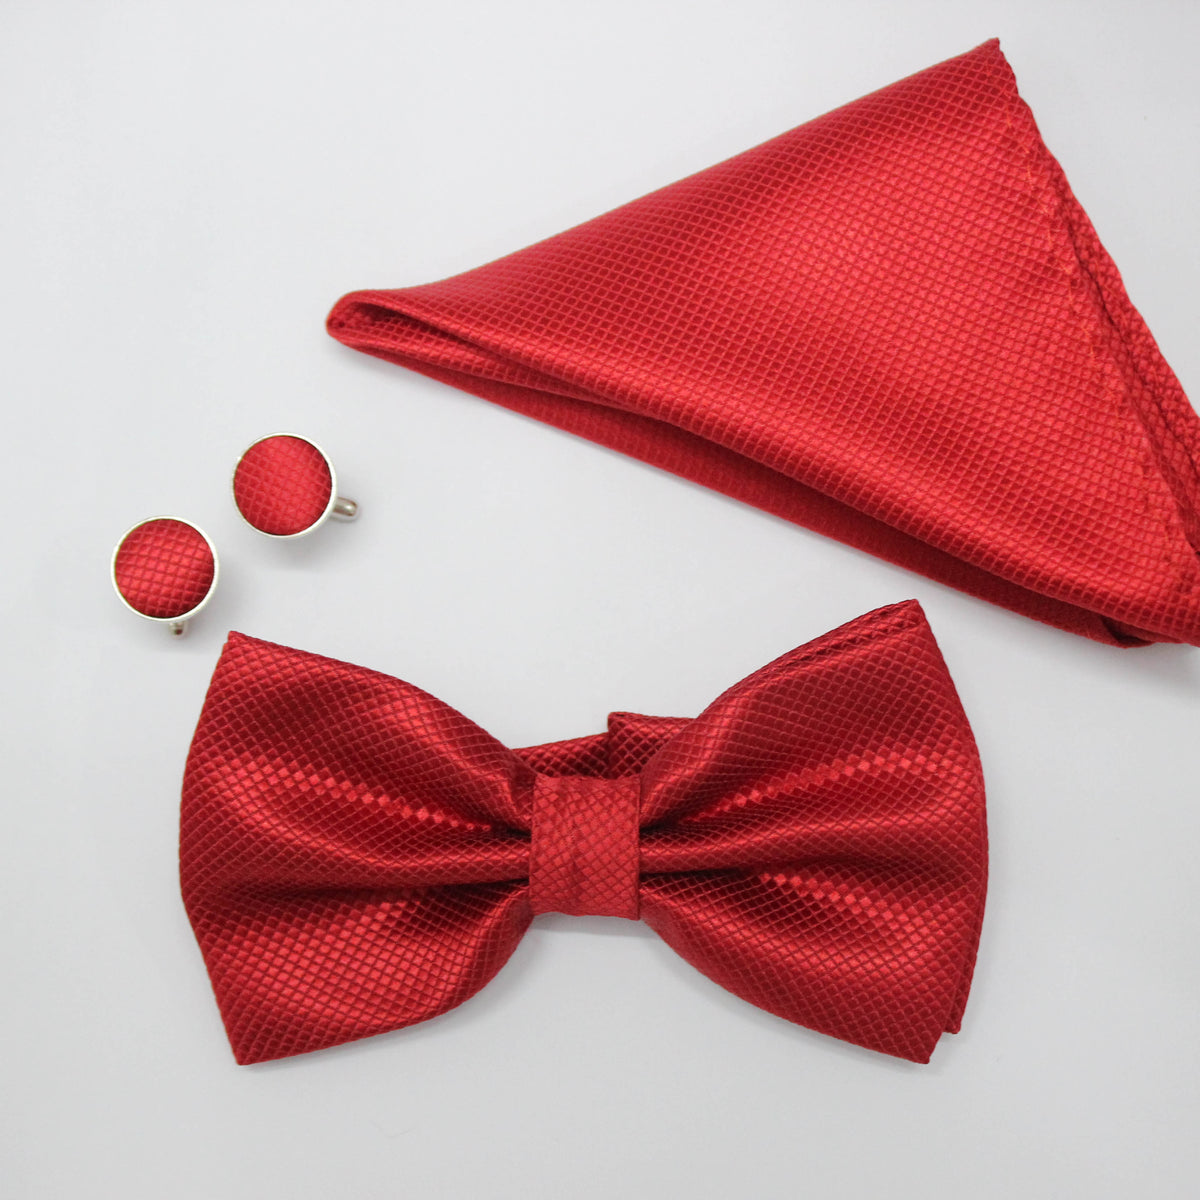 RED TEXTURED BOW TIE SET